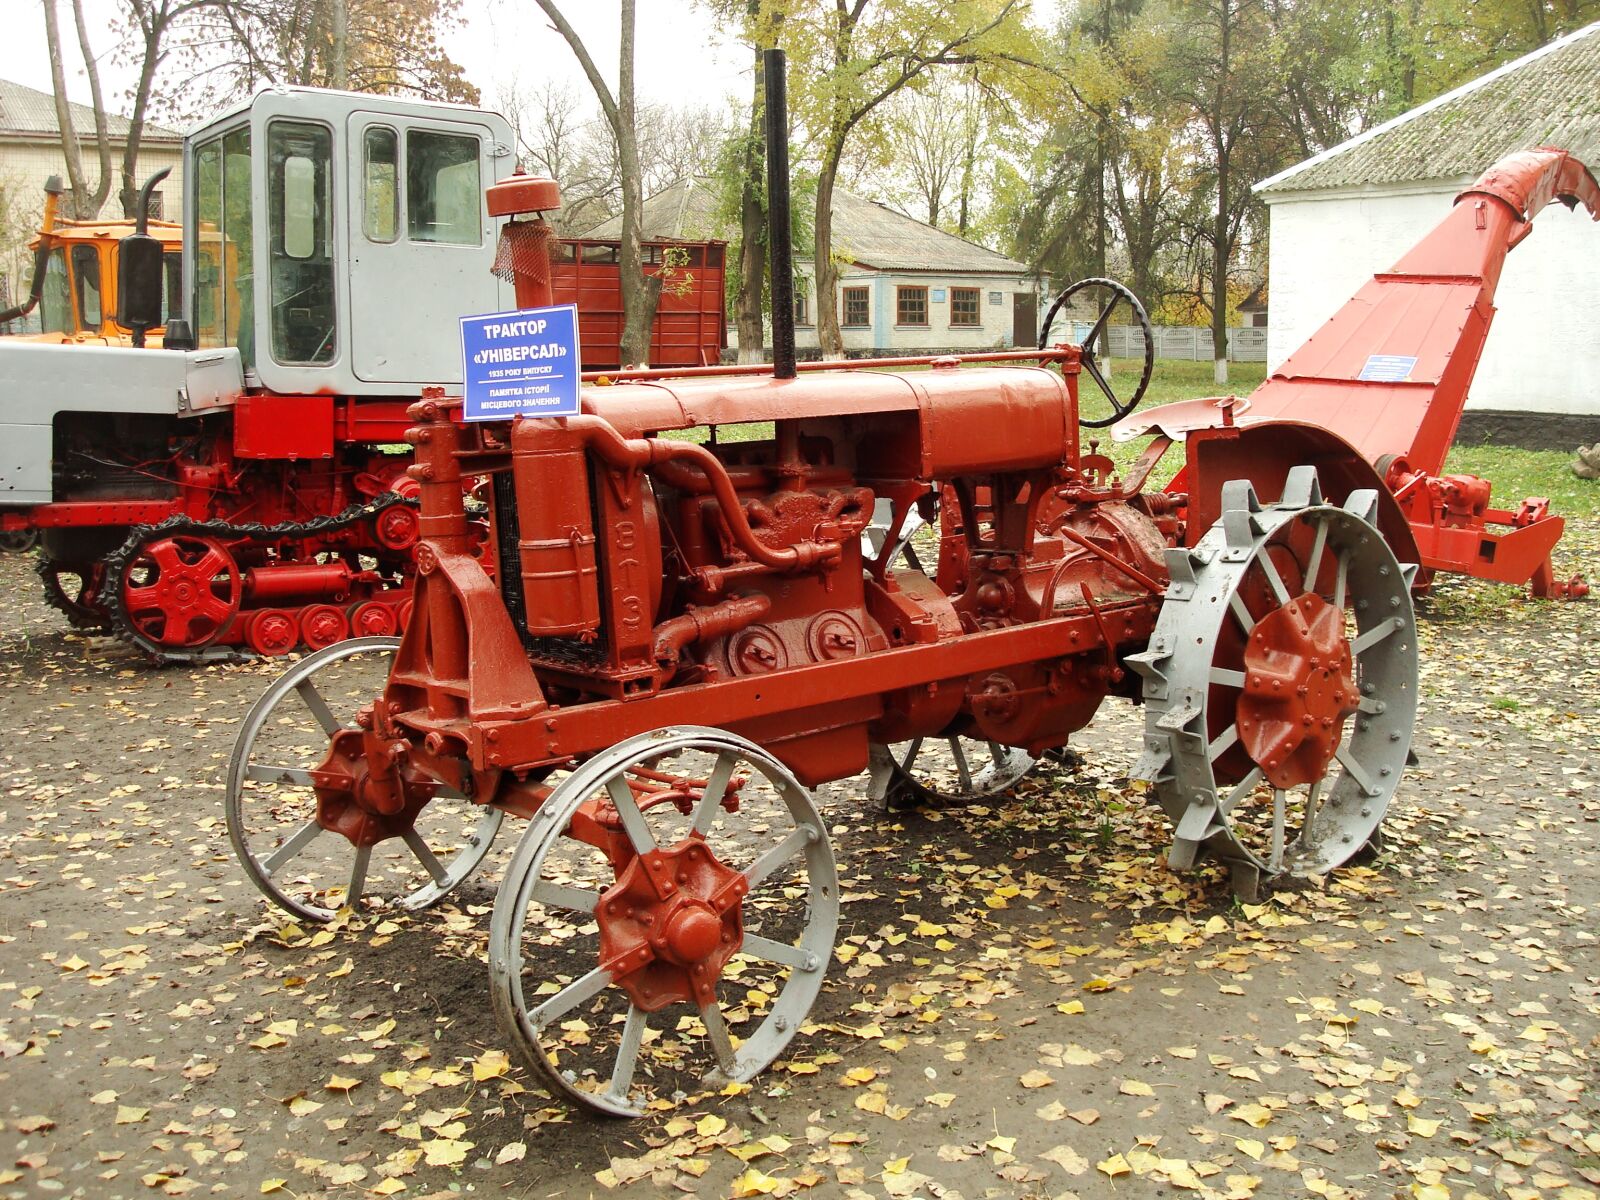 Sony DSC-W80 sample photo. The ussr, tractor, tractors photography